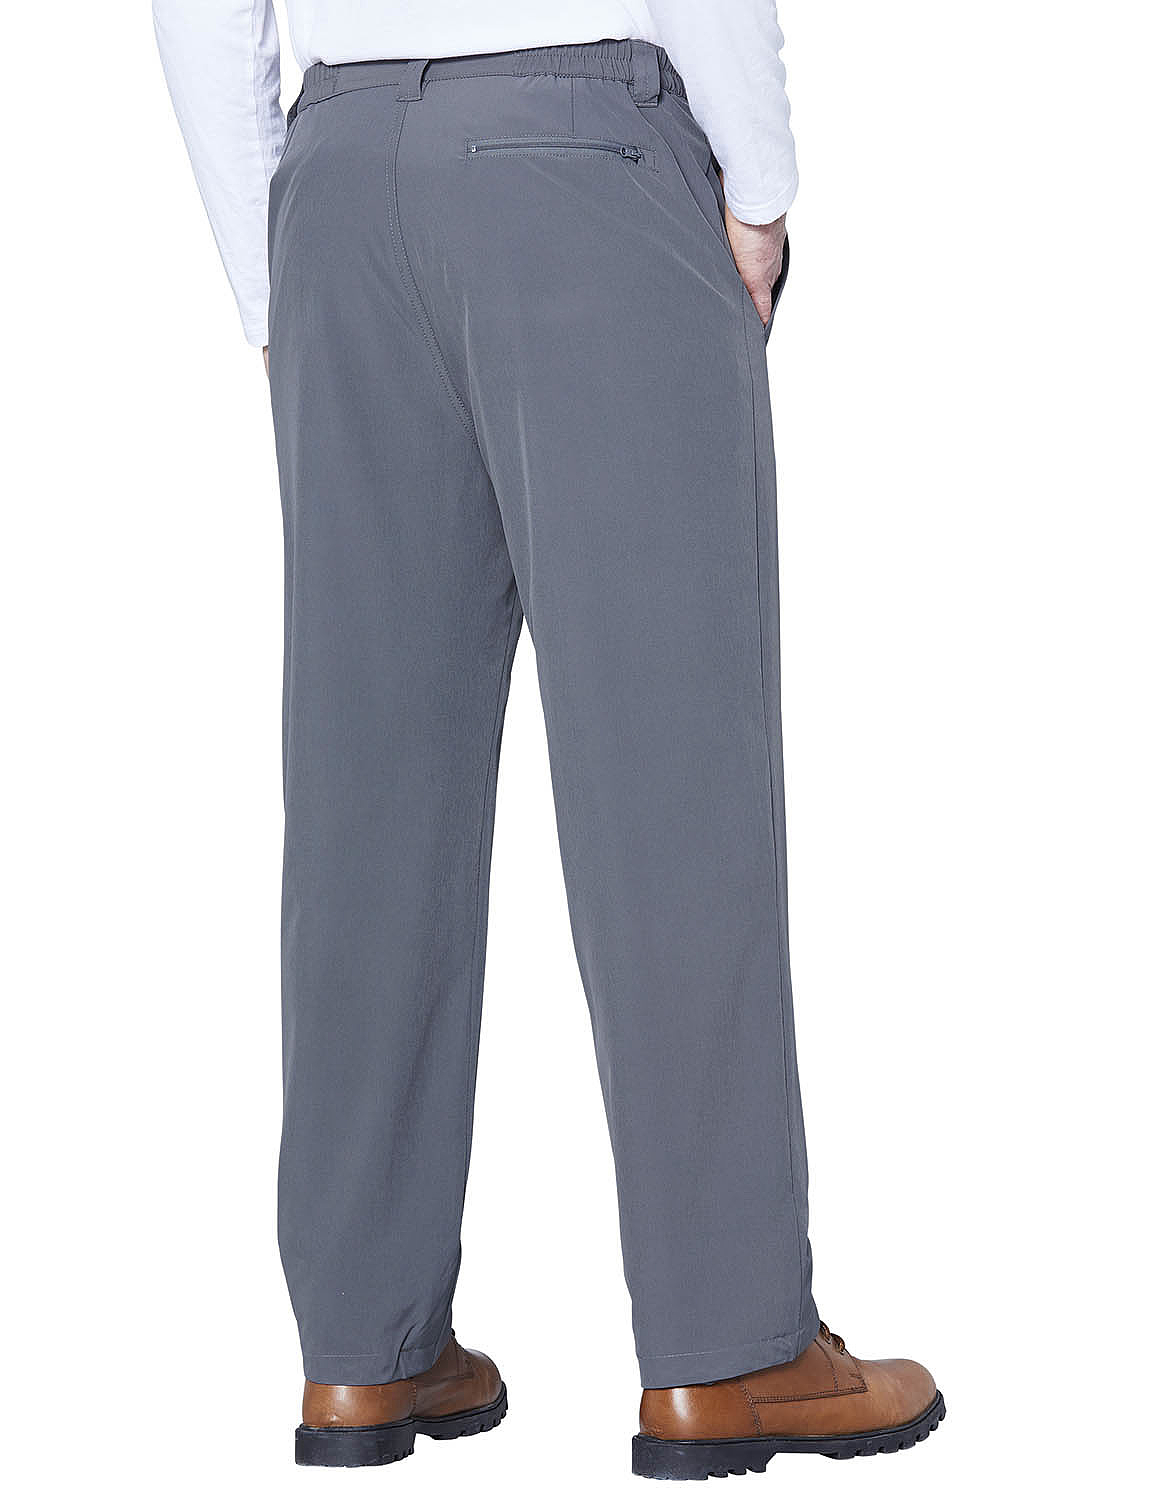 Pegasus Water Resistant Anti Pill Fleece Lined 2 Way Stretch Trouser ...